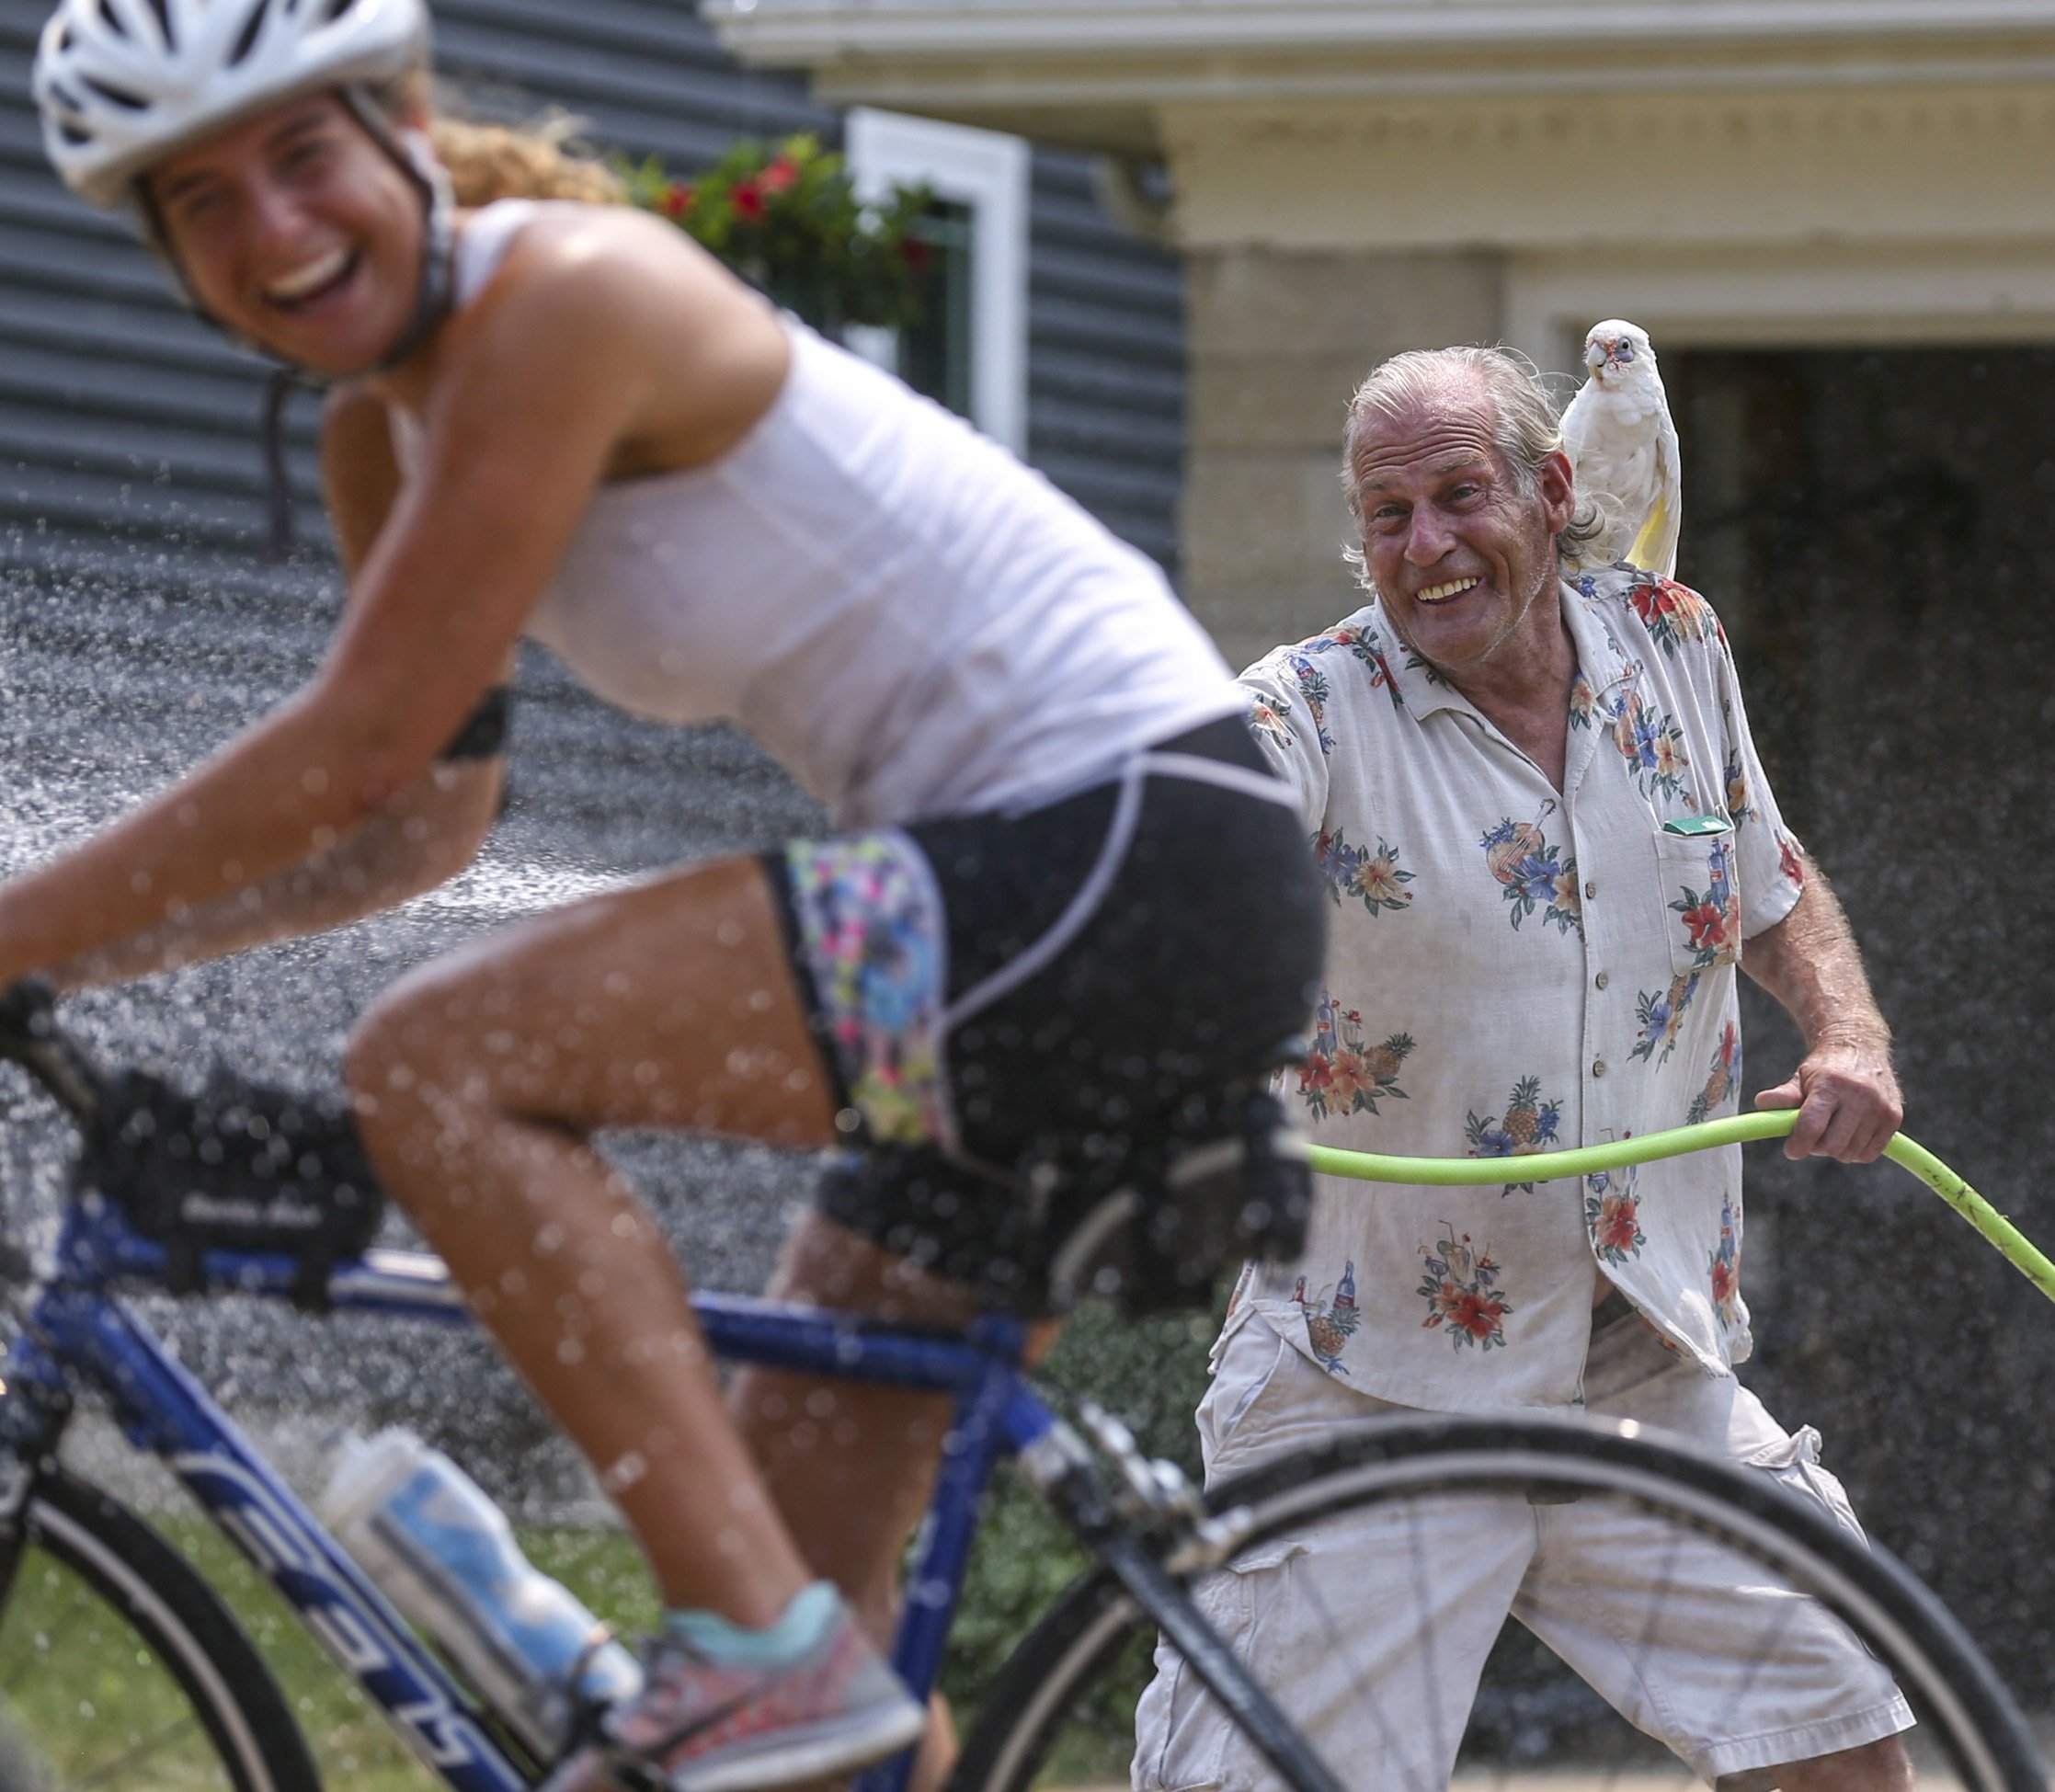  Steve Lawrence of Central City stands in his front yard to spray RAGBRAI riders with water to cool them down as his bare-eyed cockatoo, Leuchen, rests on his shoulder in Central City on Thursday. Lawrence took the day off work and had a few friends 